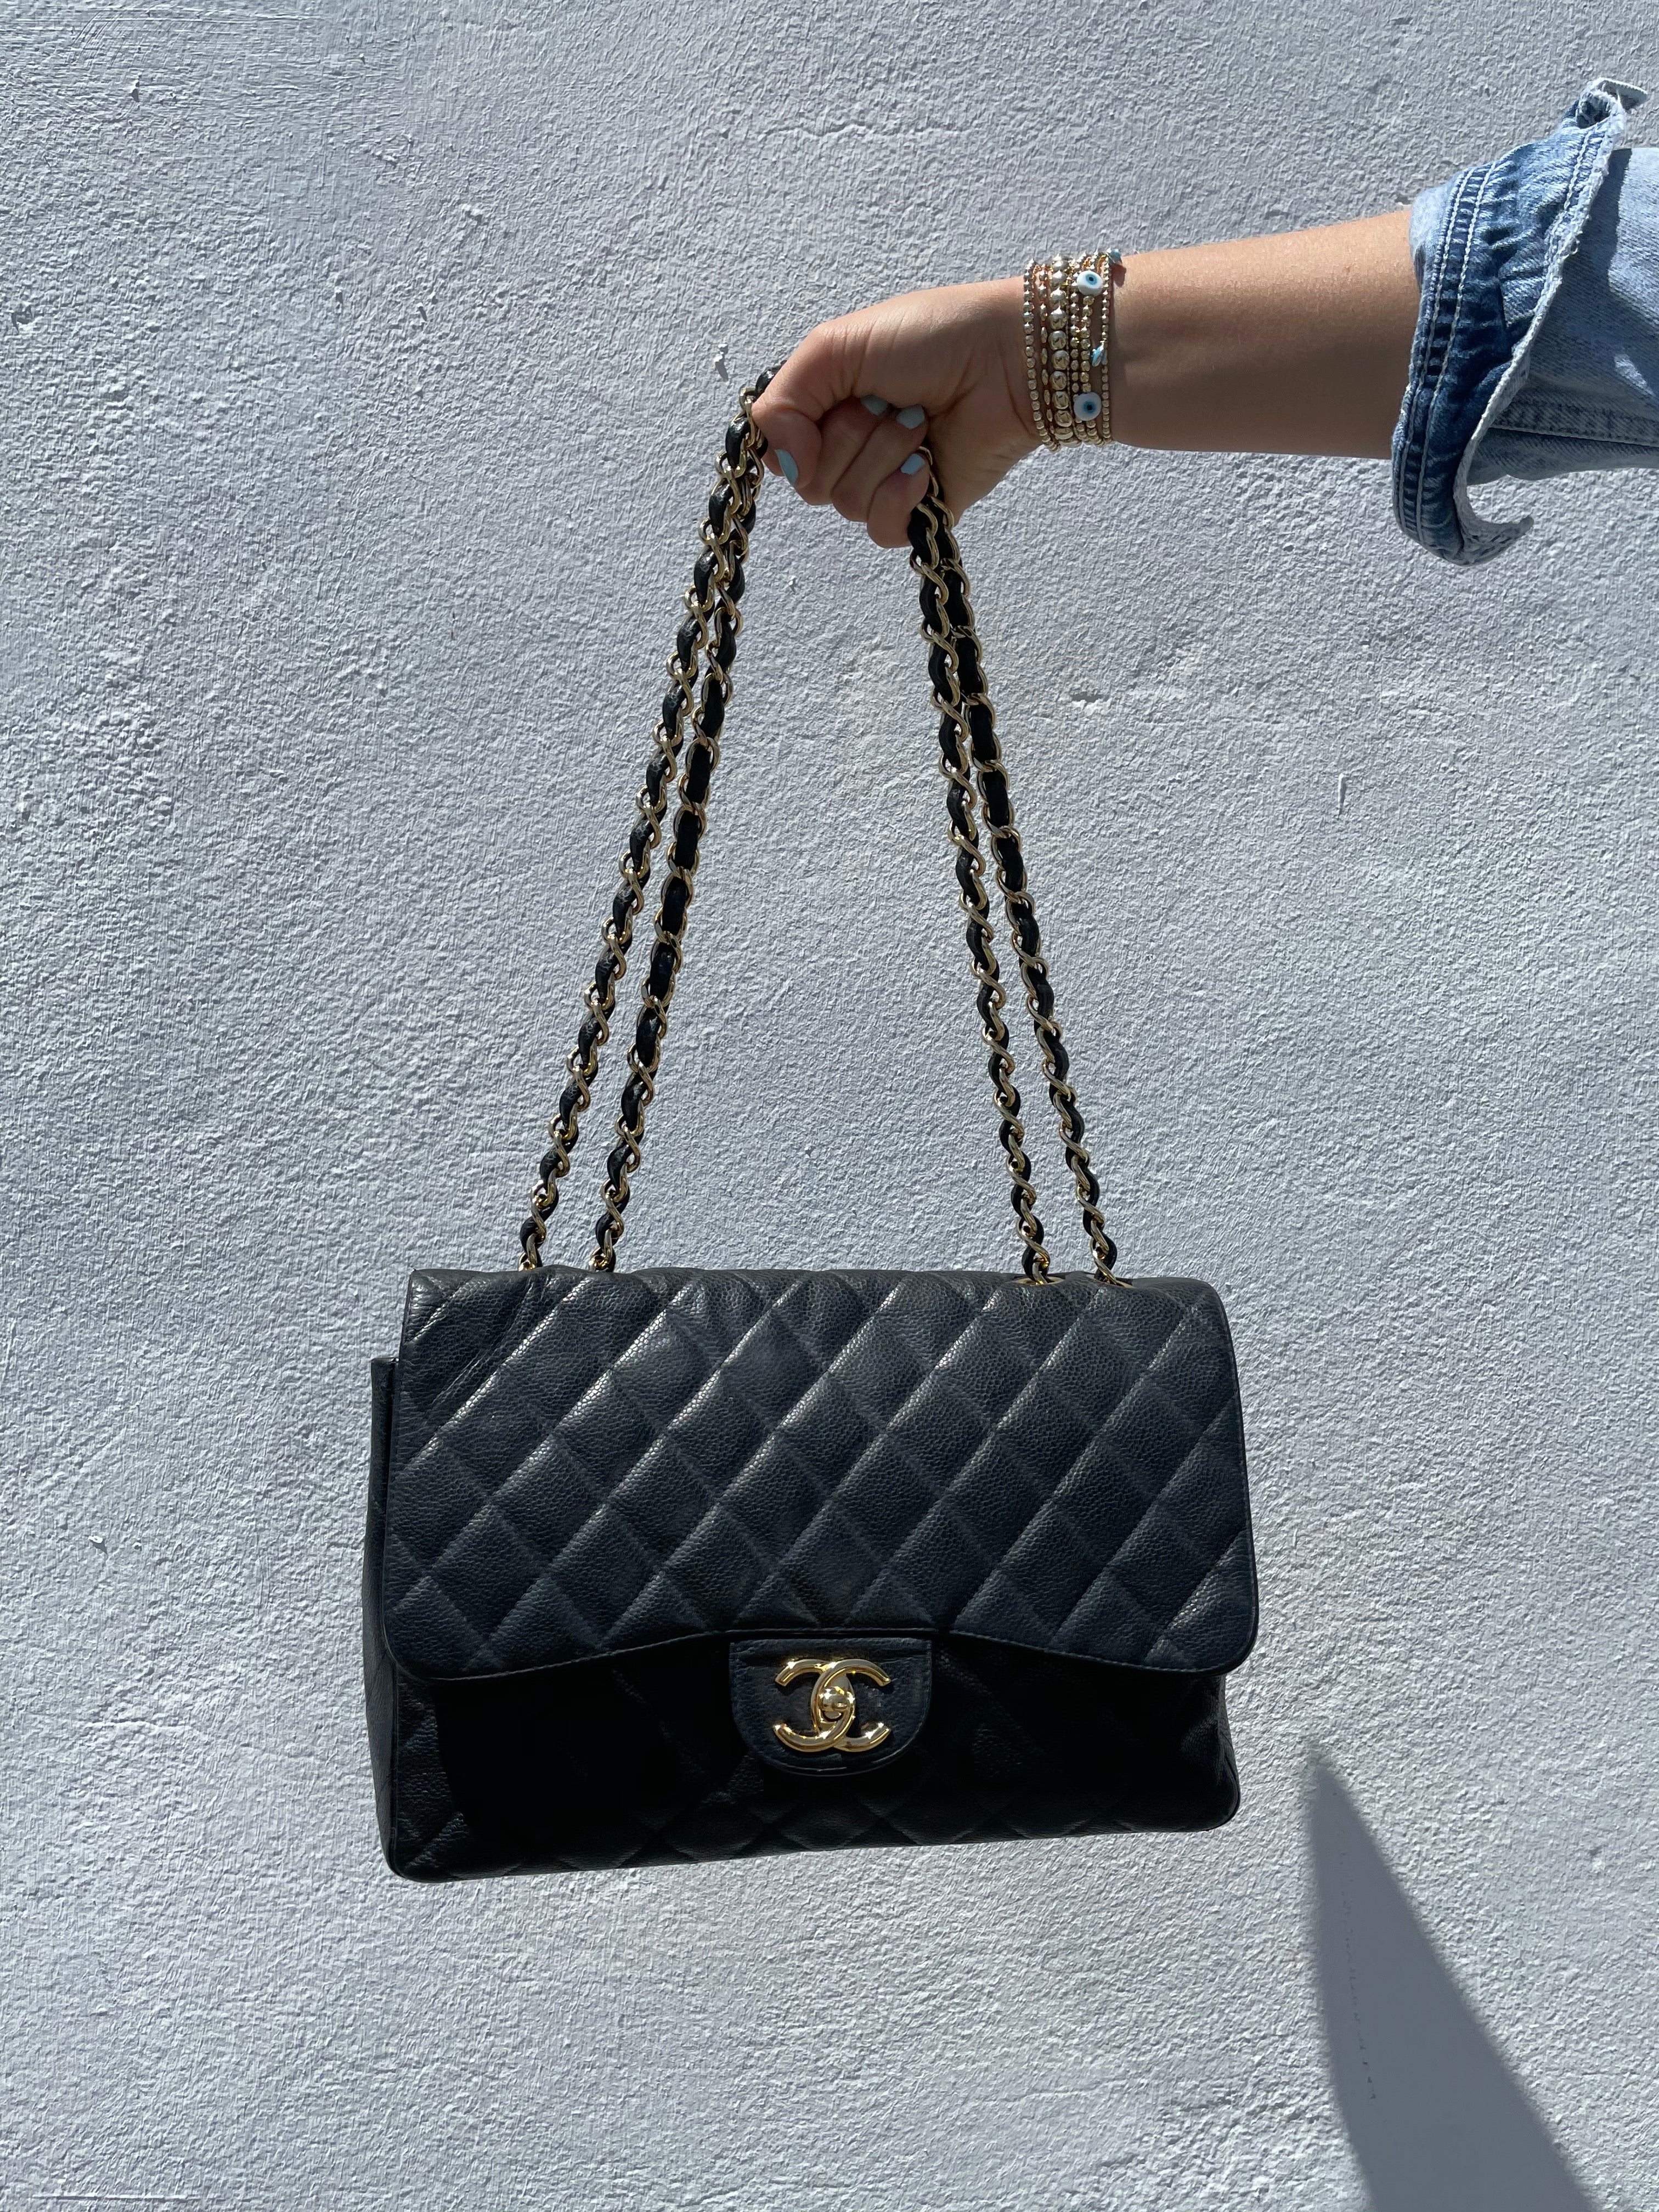 Buy or Consign Pre-Owned Chanel Bags